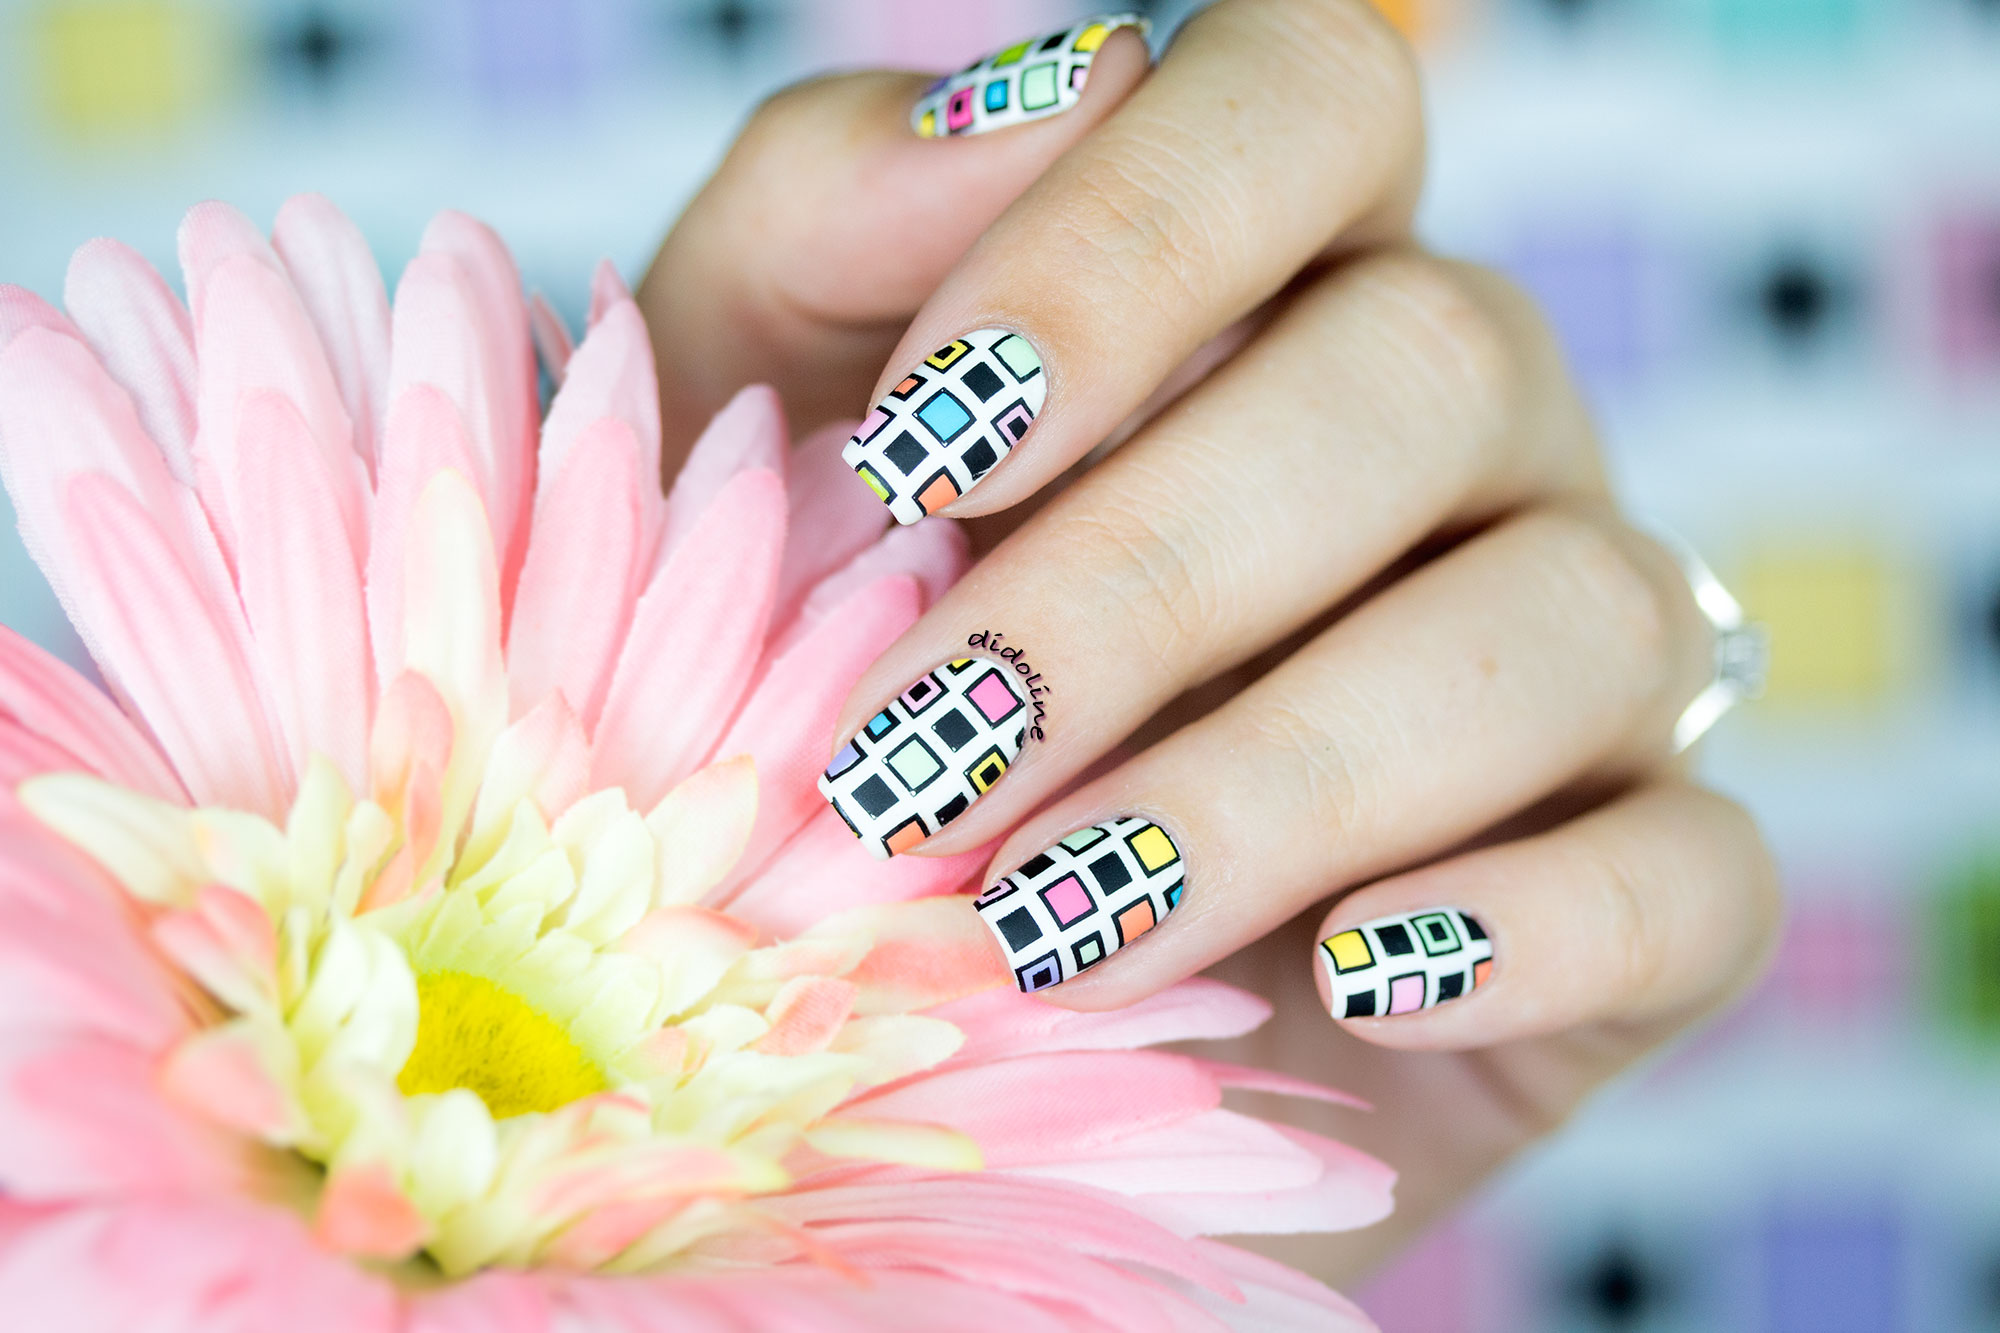 Advanced Nail Art Classes in New York City - wide 2